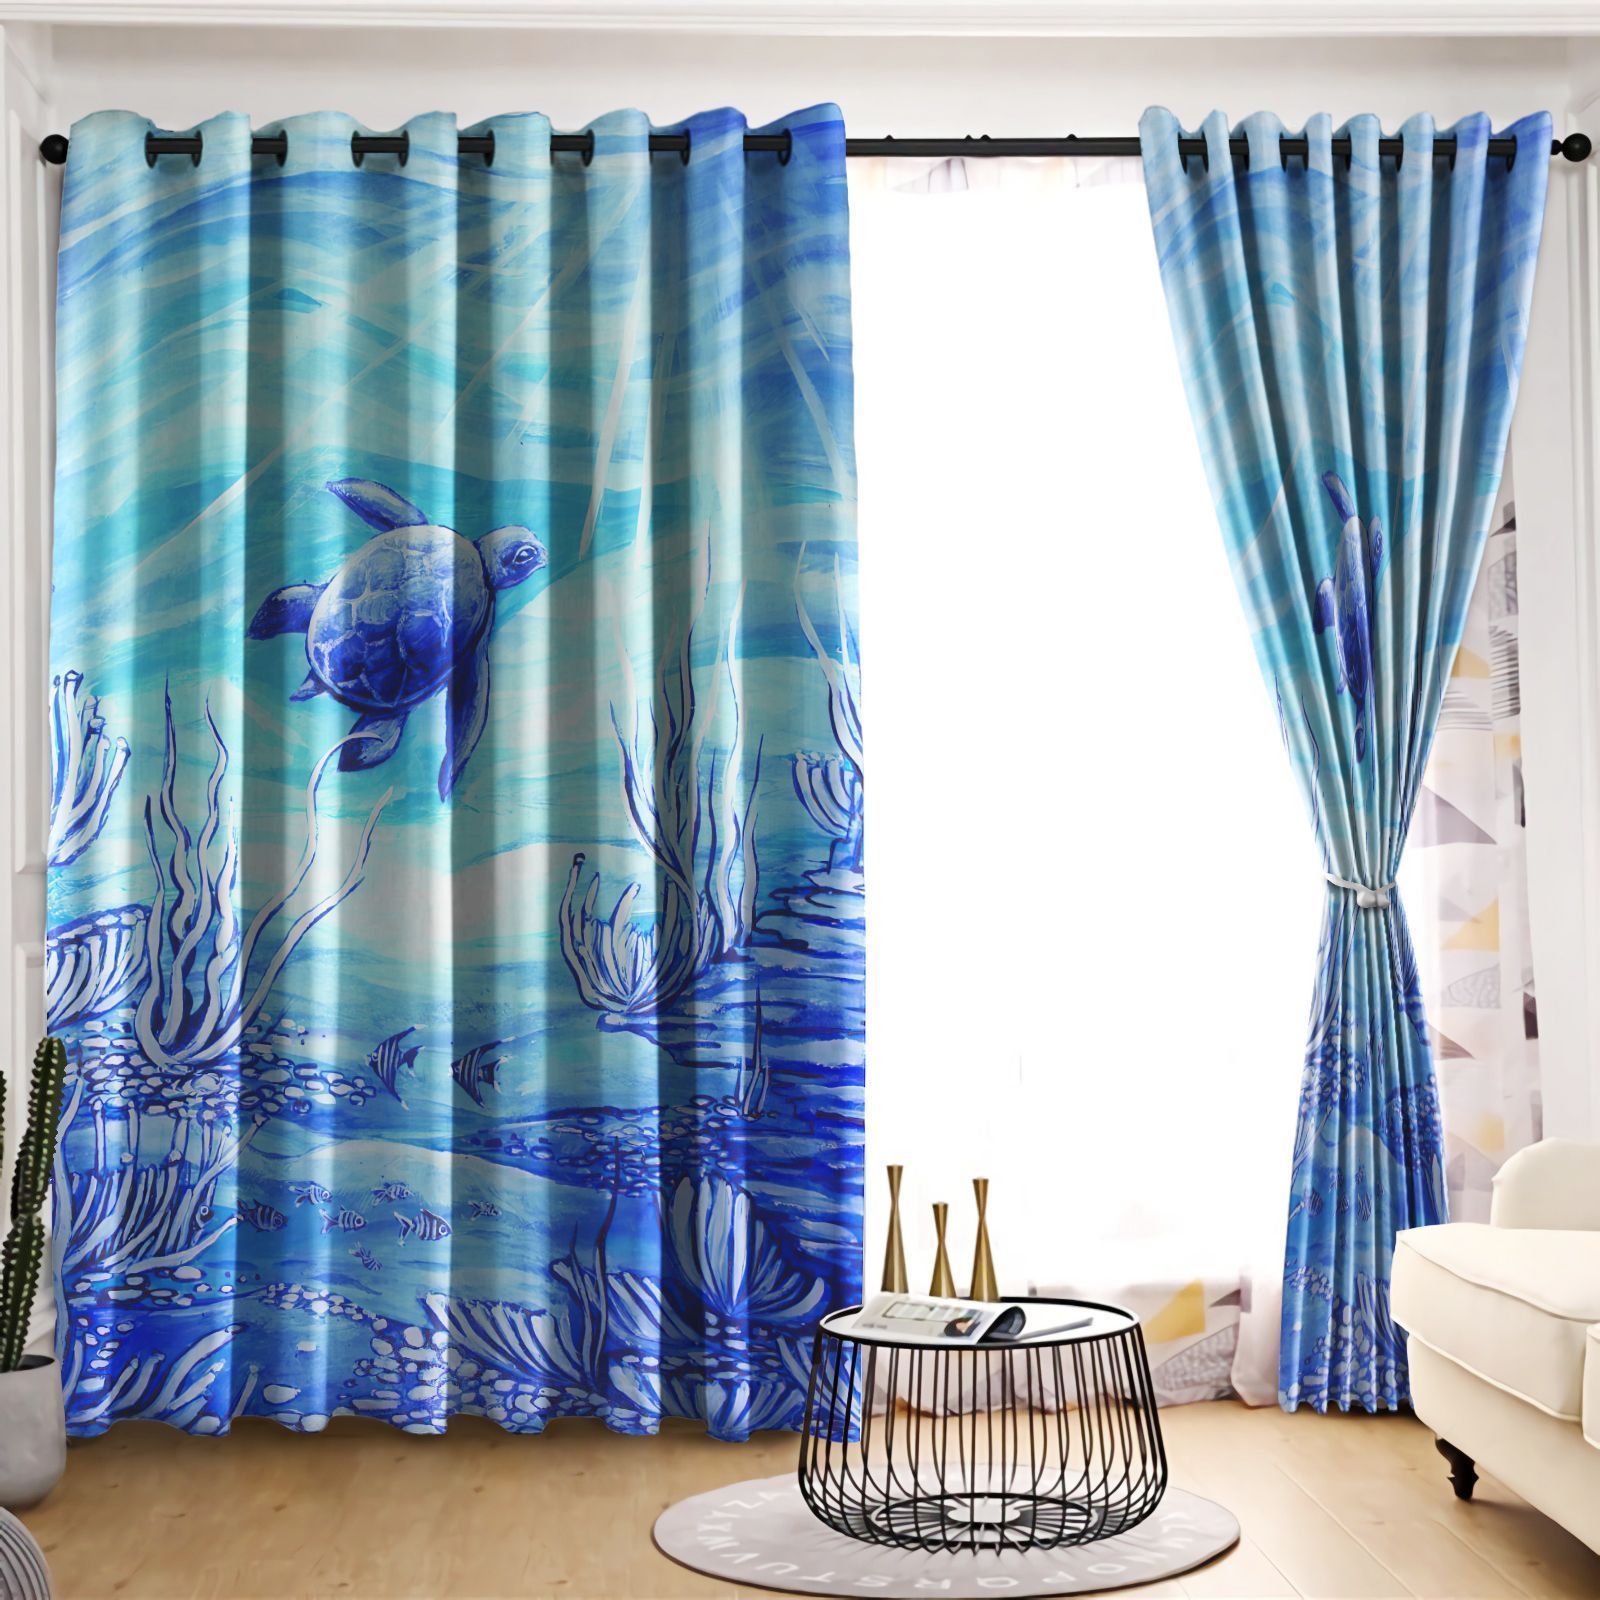 Turtle Mysterious Life Under The Sea Printed Window Curtain Home Decor